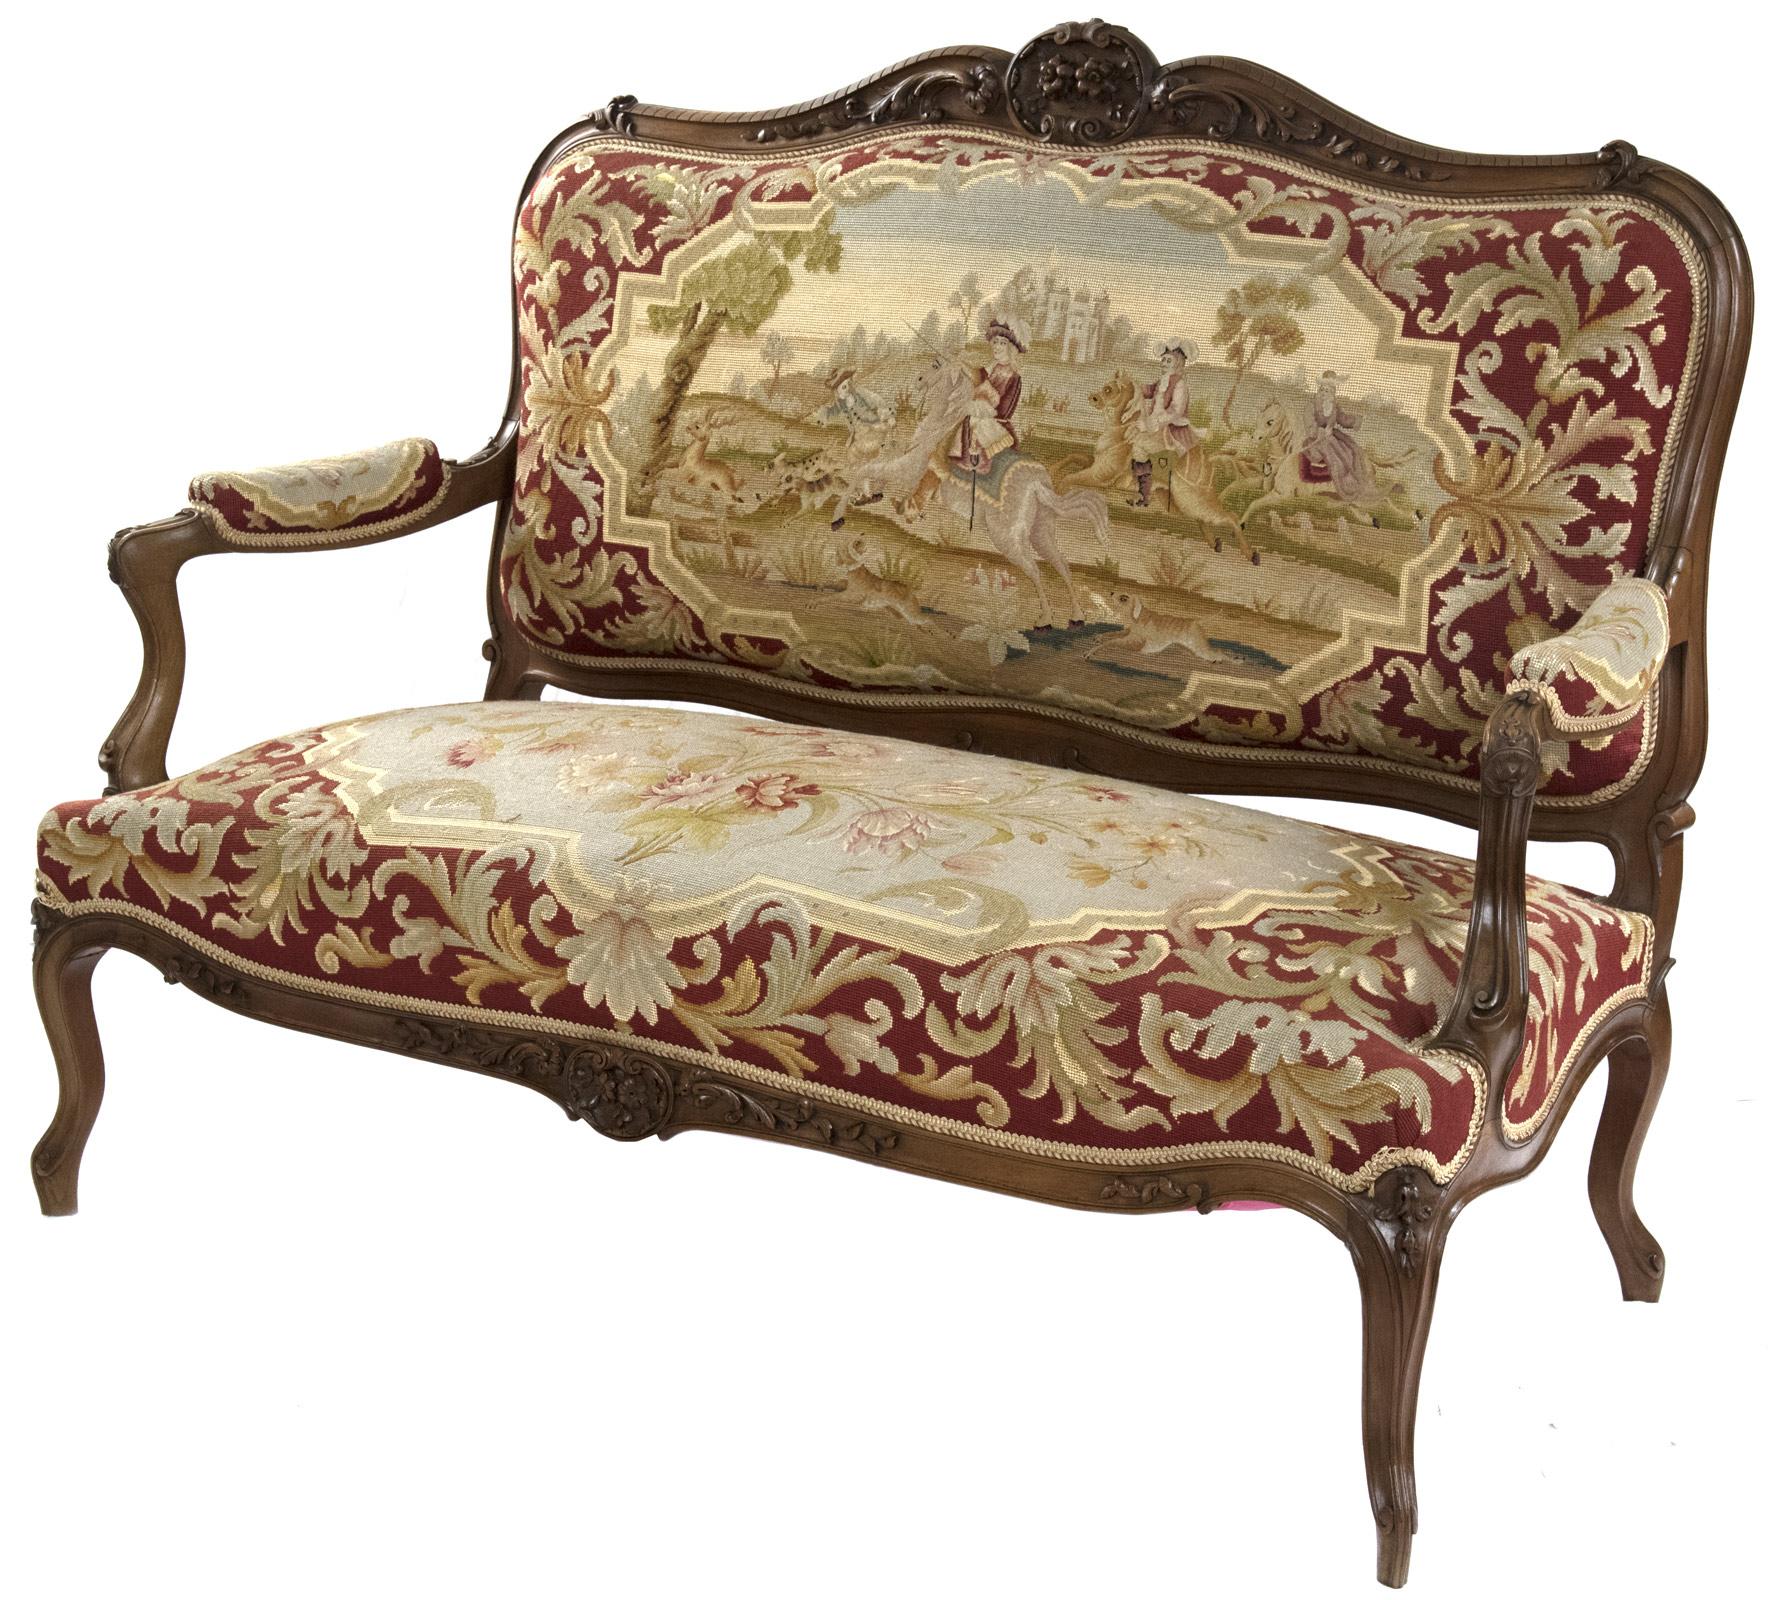 A Louis XV-style carved walnut sofa with gros point needlepoint upholstery in the style of Aubusson tapestry. The carved and shaped upholstered backrest, which depicts a hunting scene: men on horseback follow hunting dogs that are cashing a stag